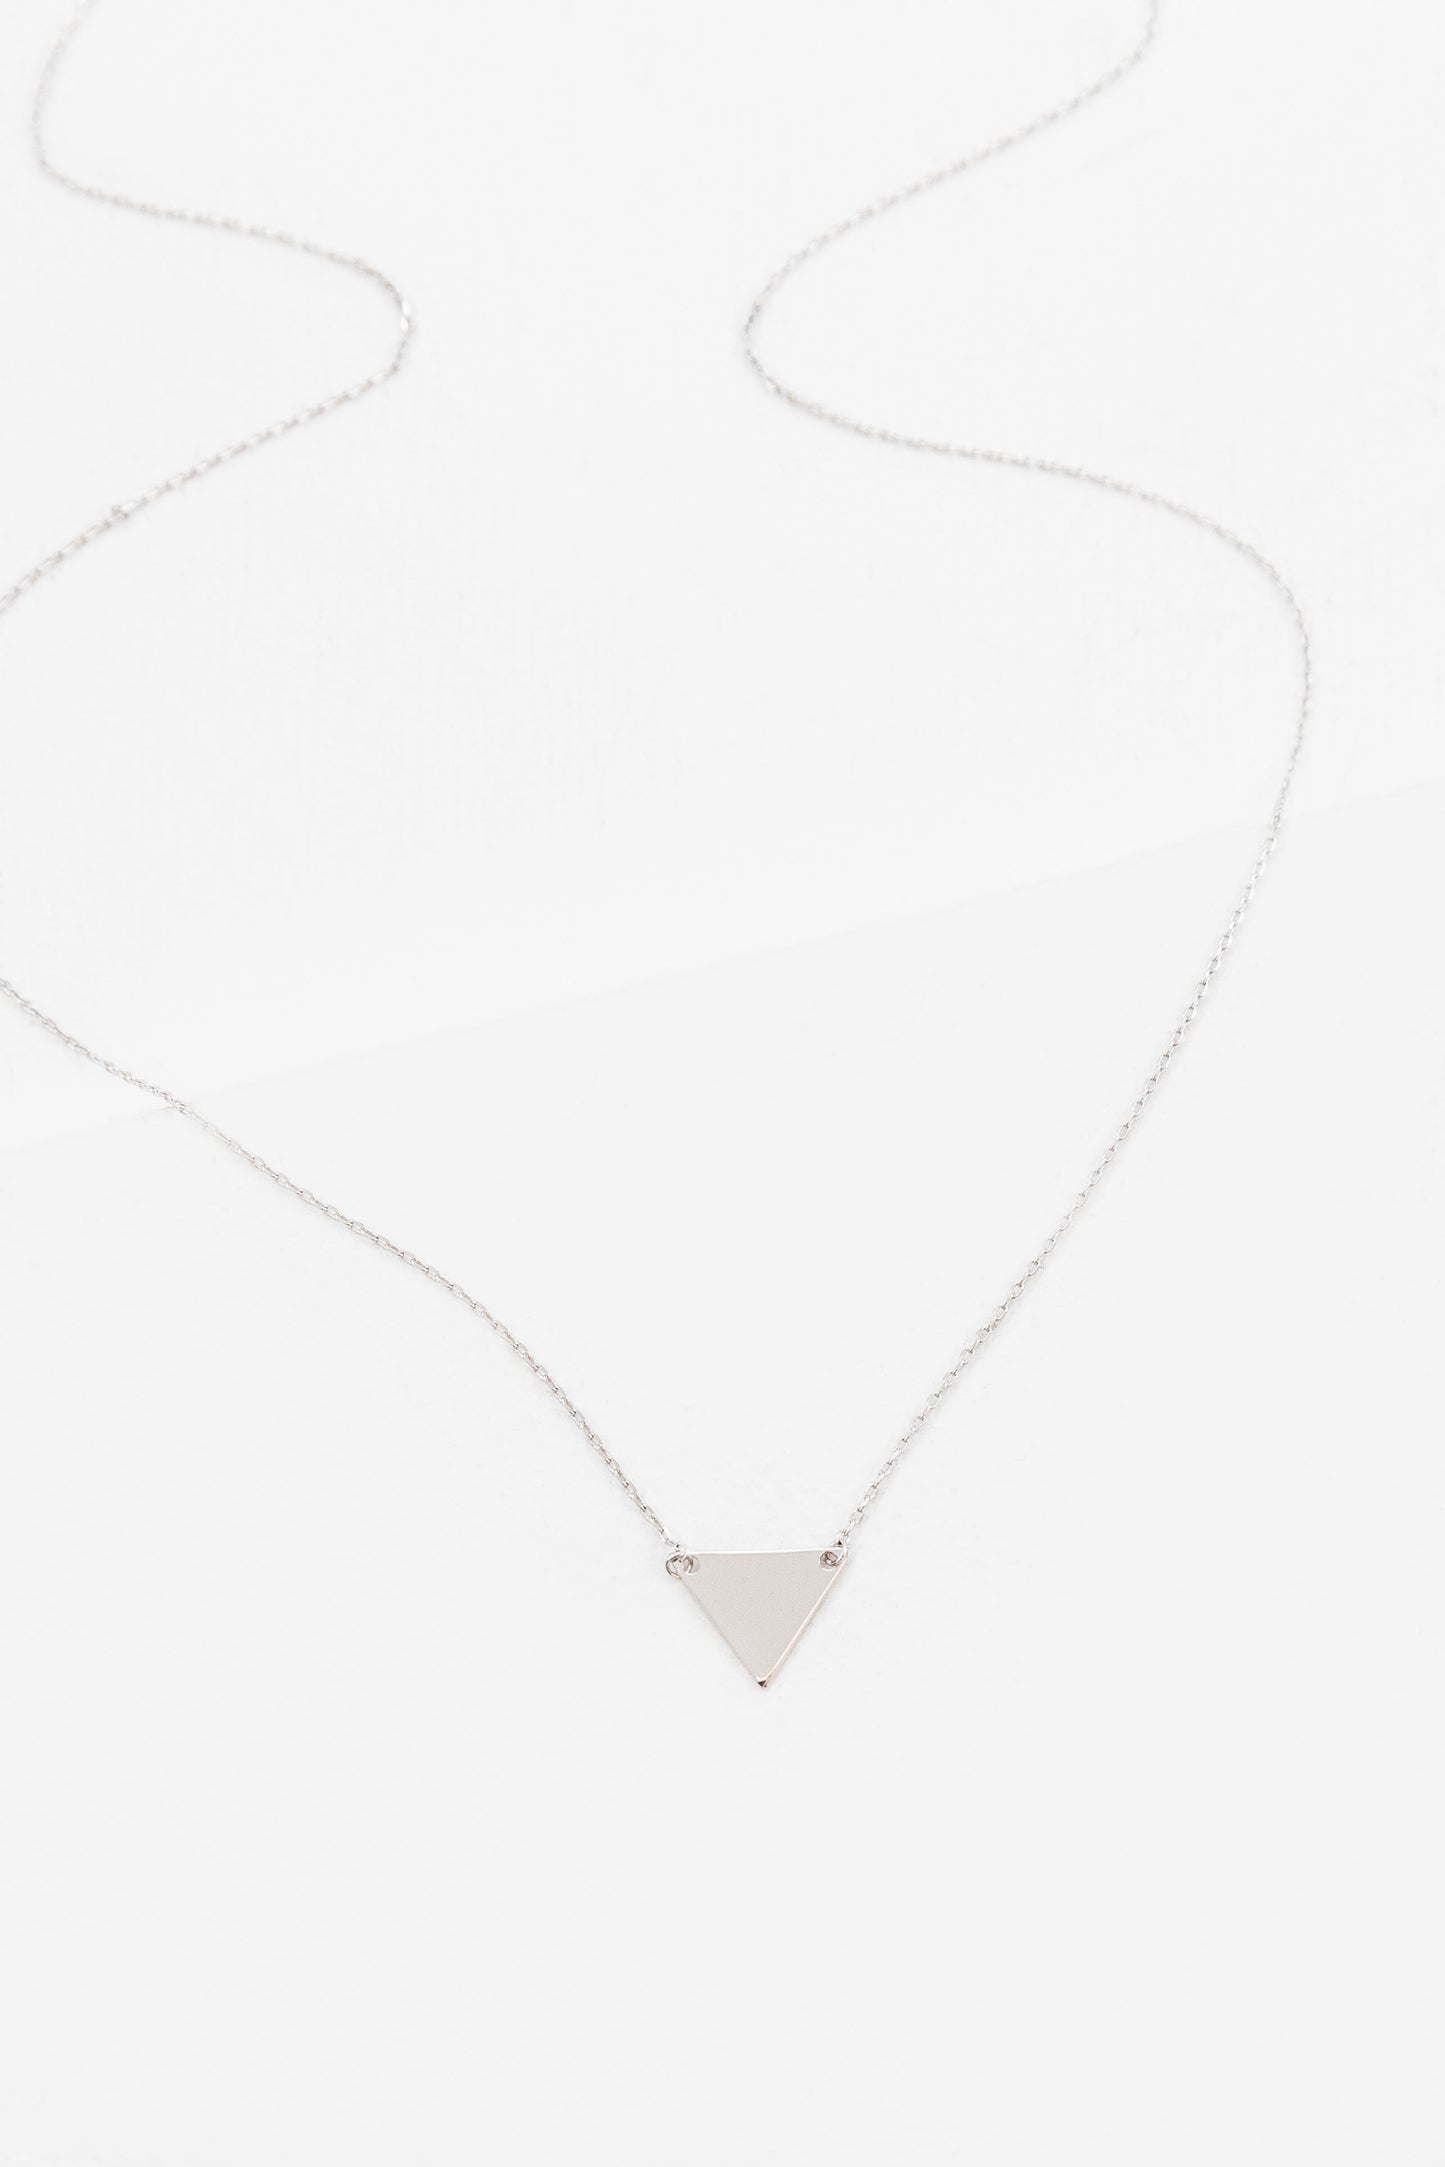 In Focus Triangle Necklace (14K)